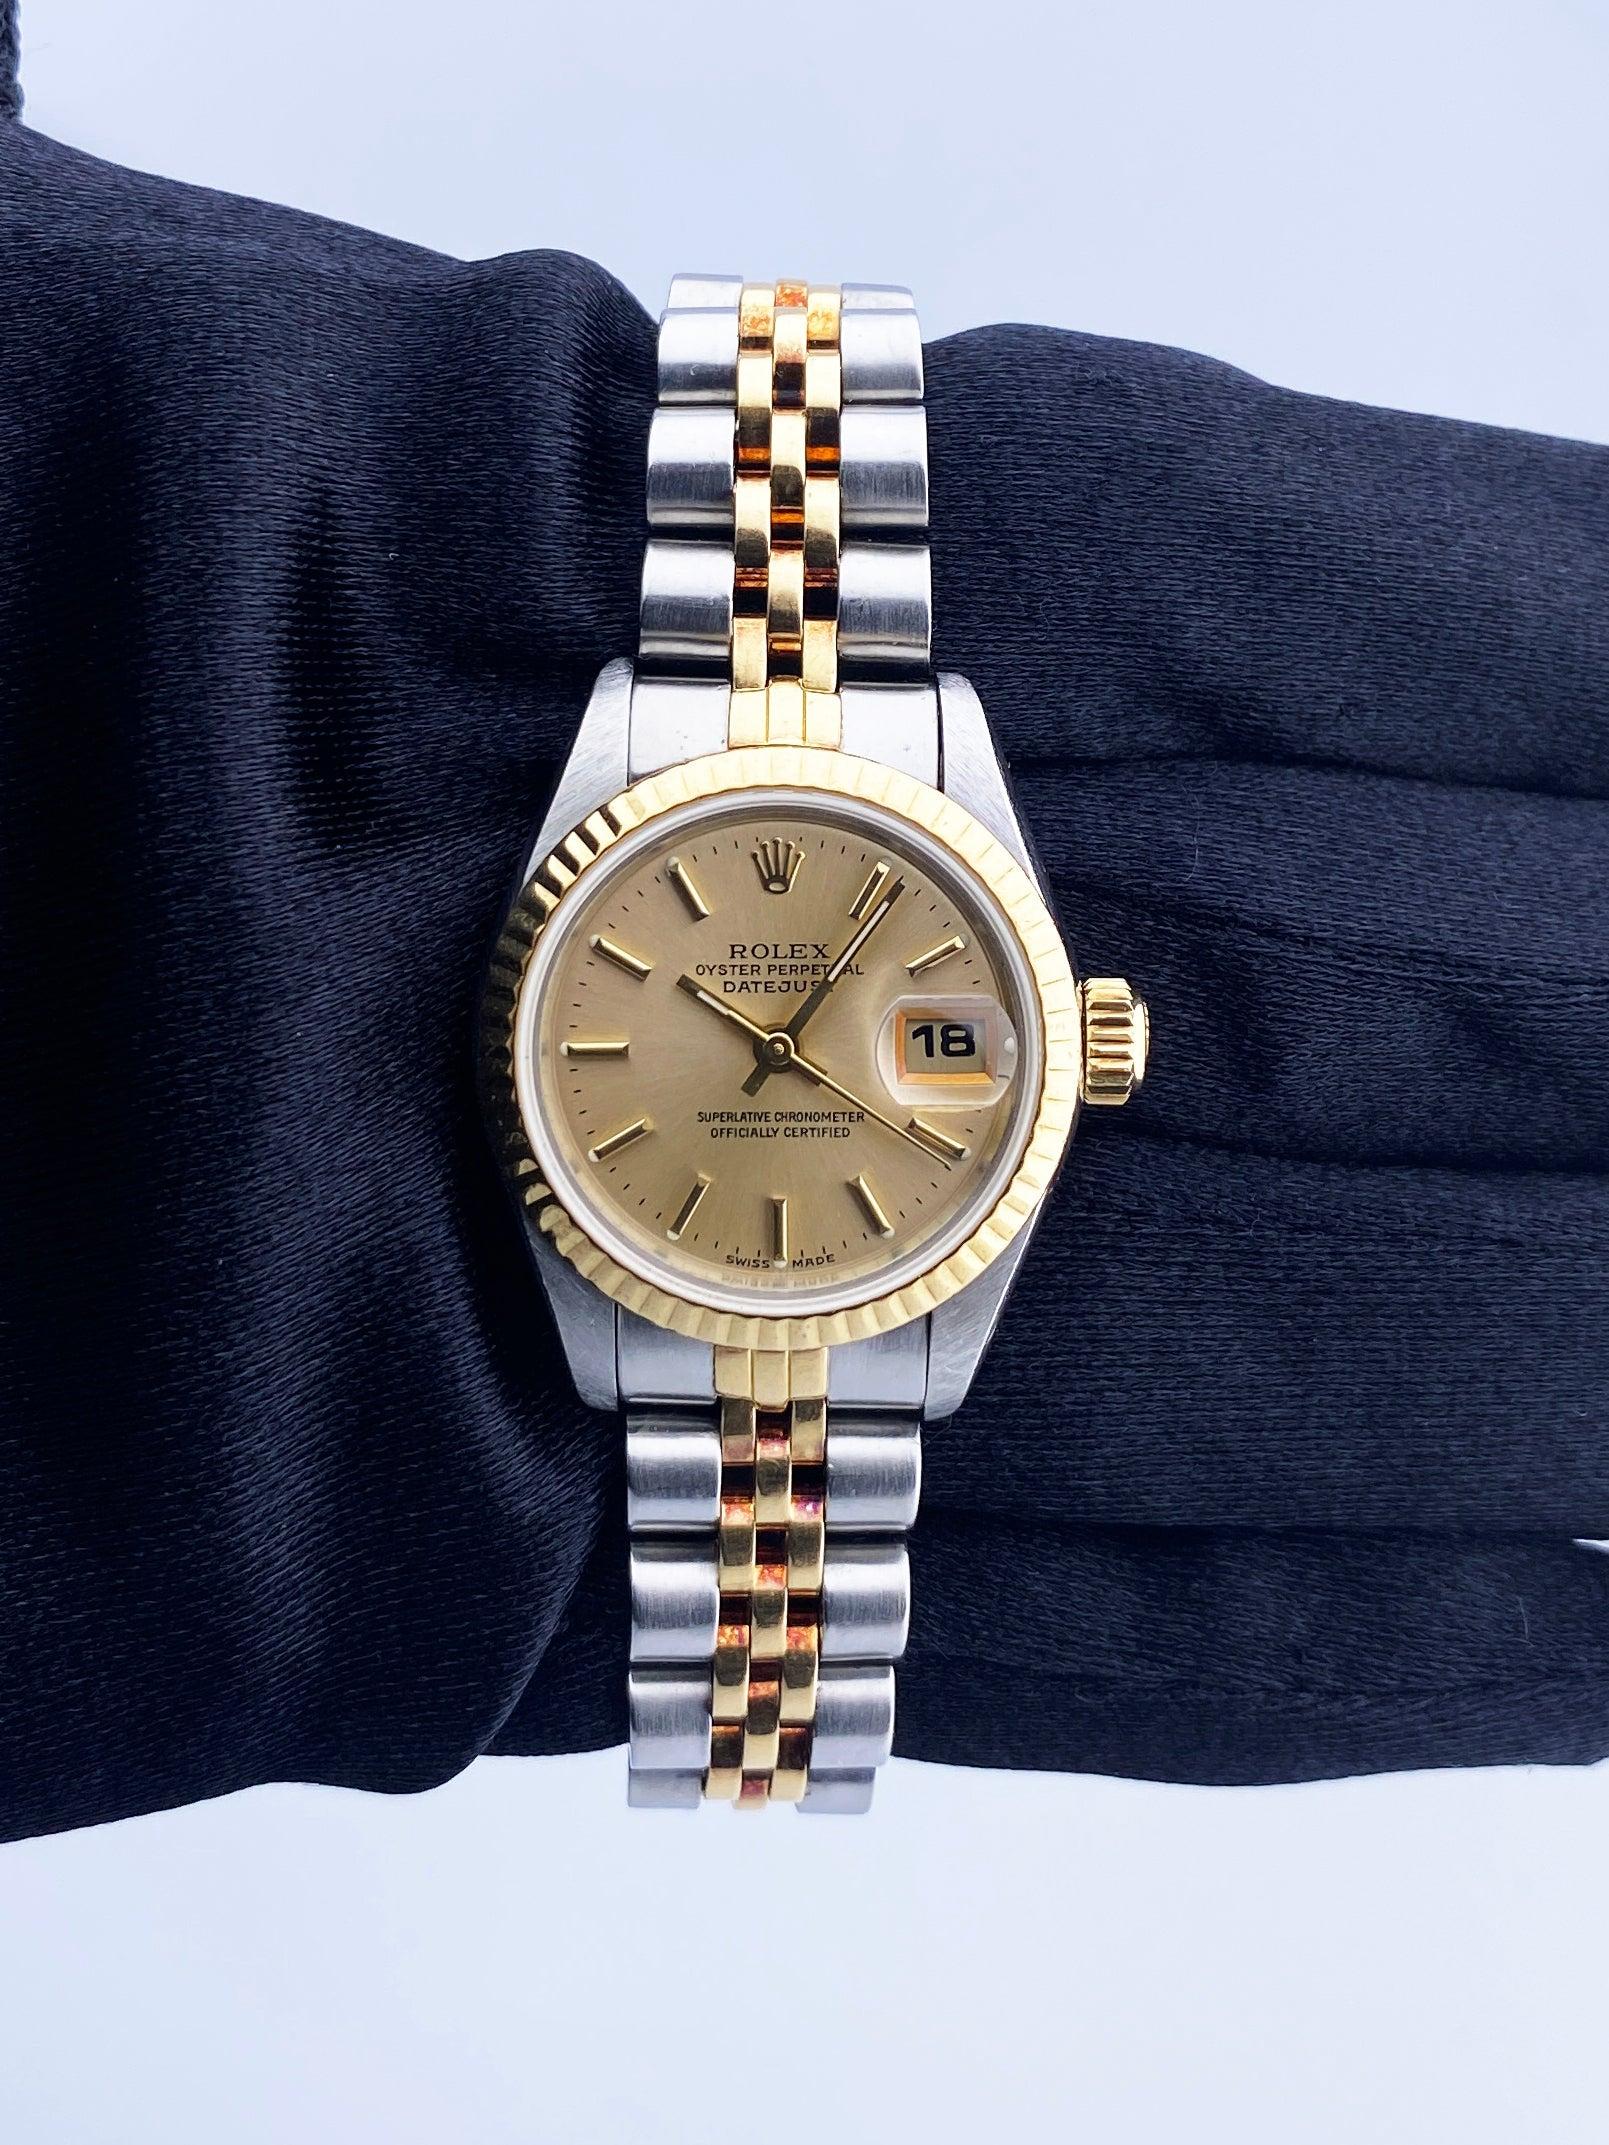 Rolex Datejust 69173 Ladies Watch. 26mm stainless steel case with 18K yellow gold fluted bezel. Champagne dial with gold hands and index hour markers. Minute markers on the outer dial. Date display at the 3 o'clock position. Stainless steel & 18K